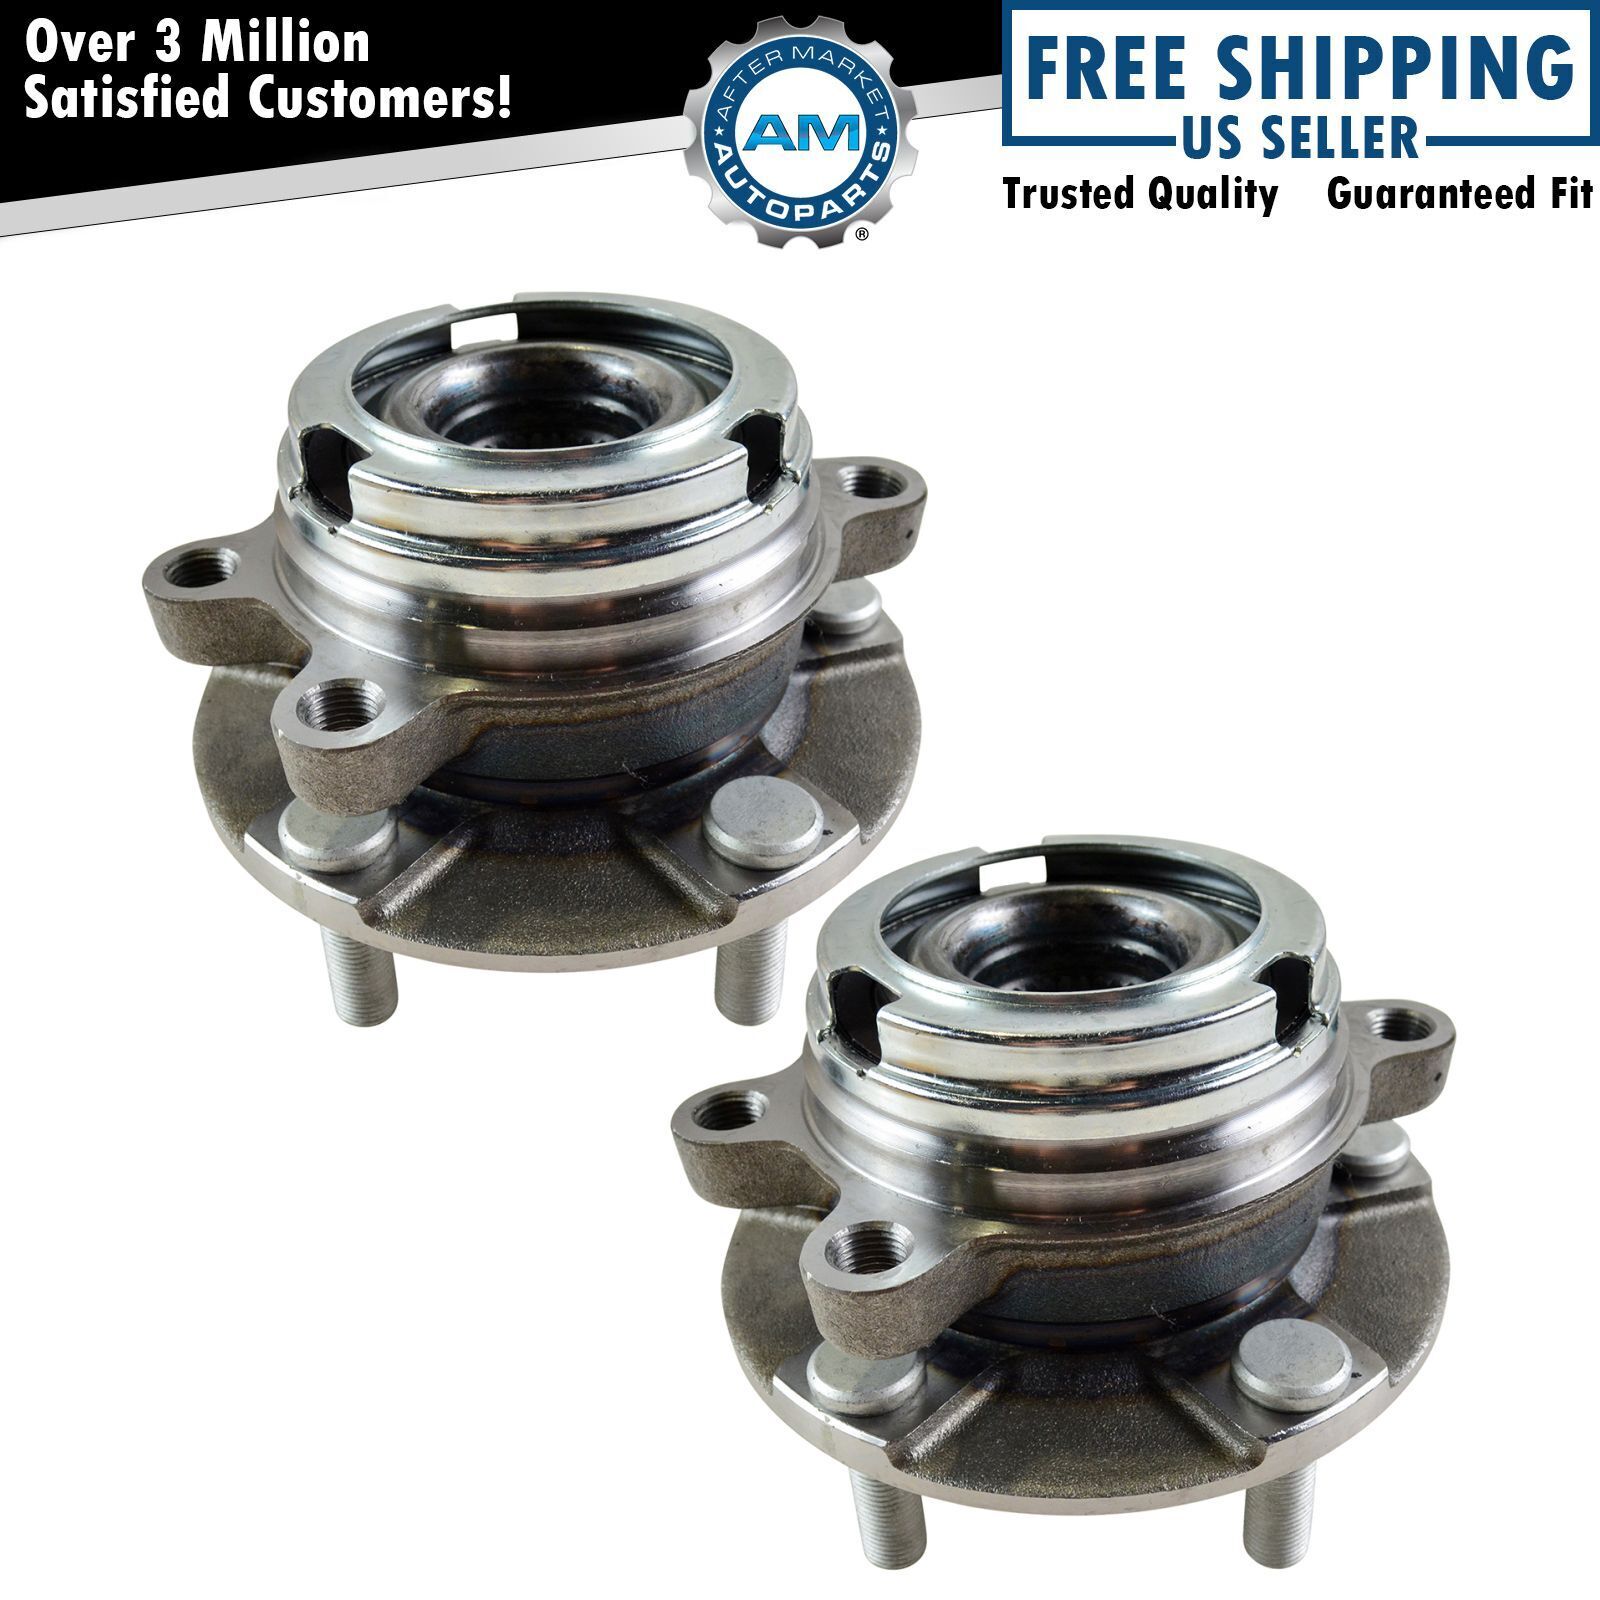 2 Front Wheel Bearing Hub Assembly fits Nissan Maxima Altima Murano Quest